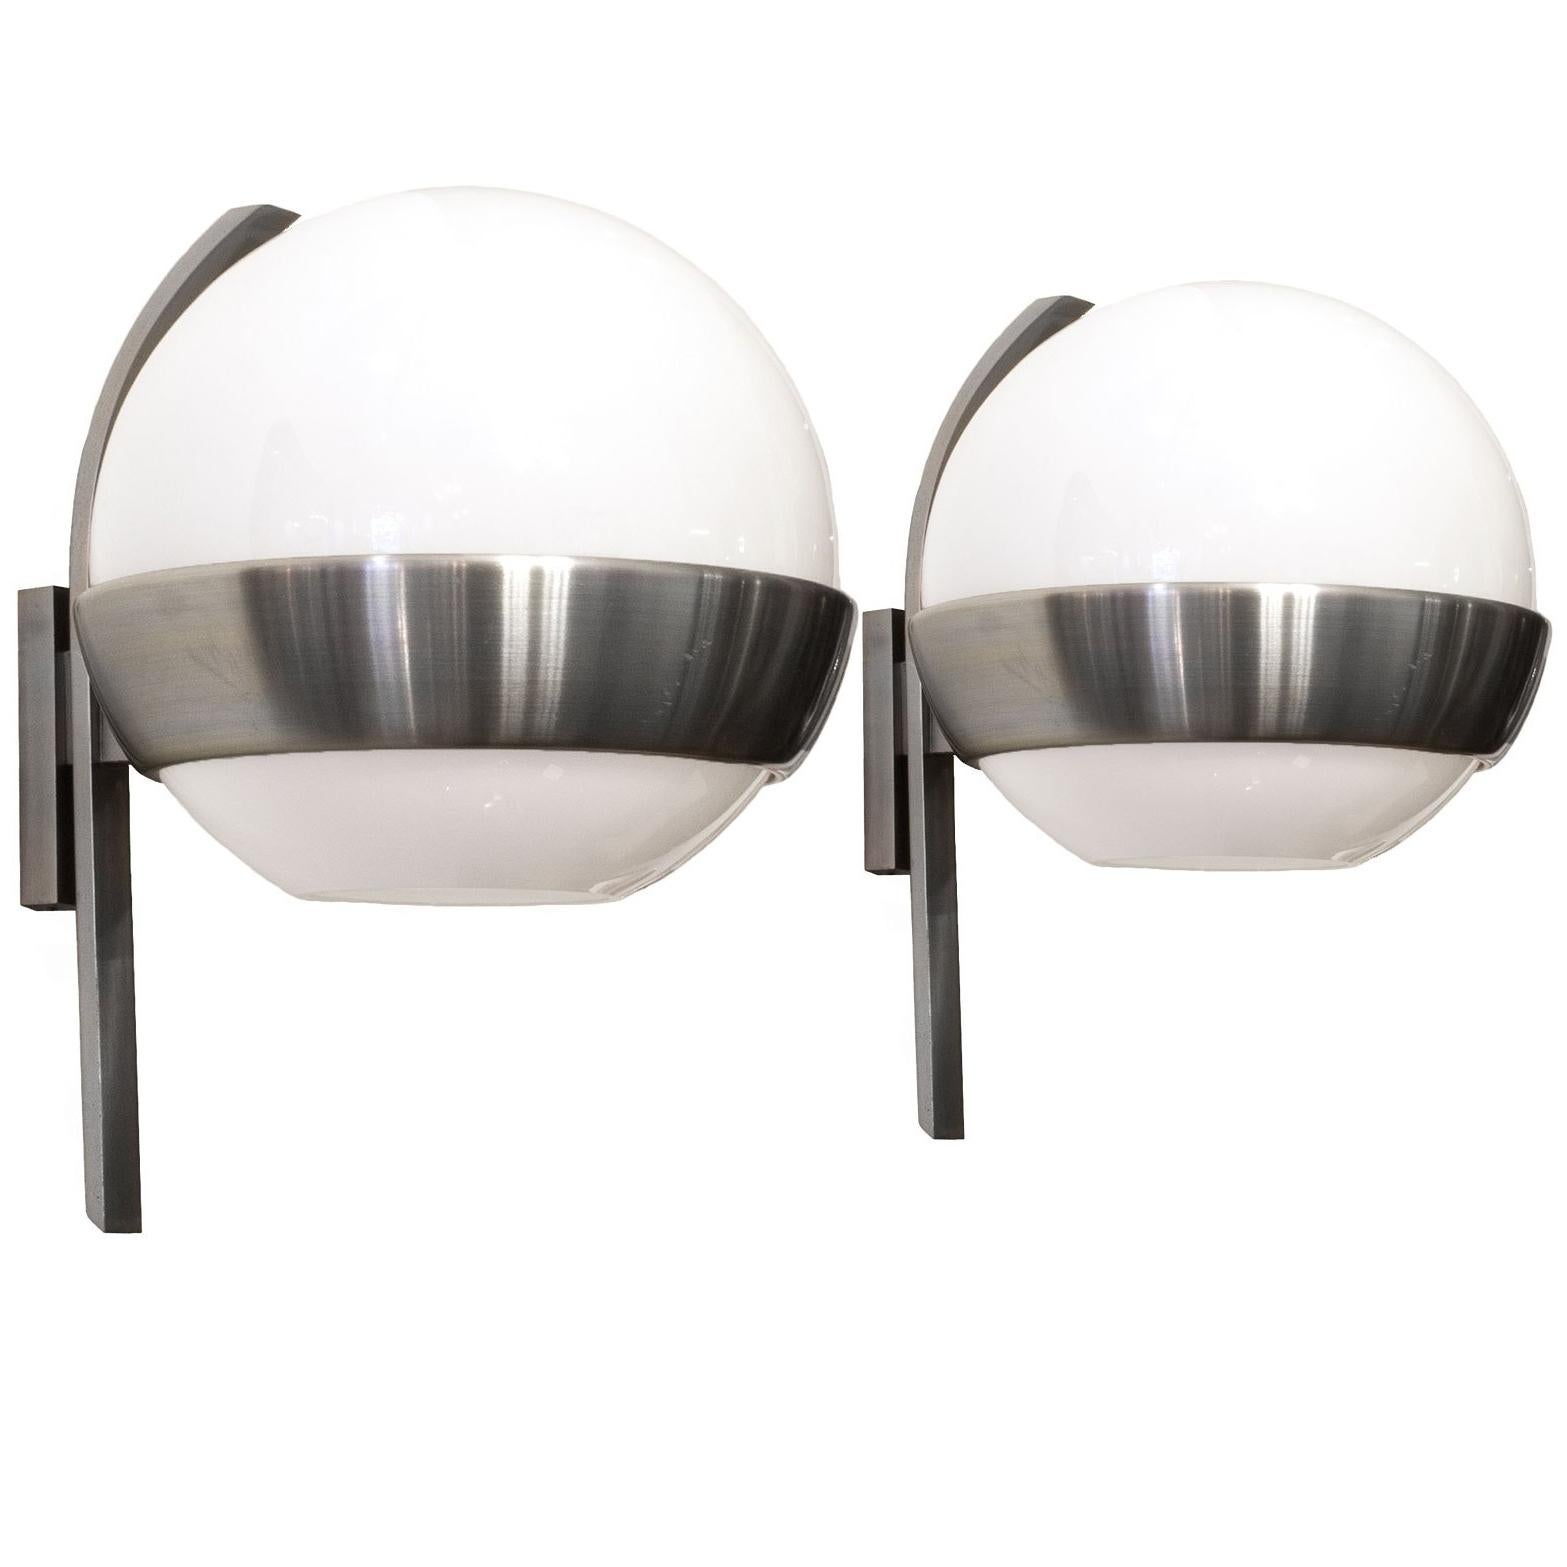 1960s Pair of Big Rounded Wall Lights, Nickel-Plated Brass and Opaline by Lumi